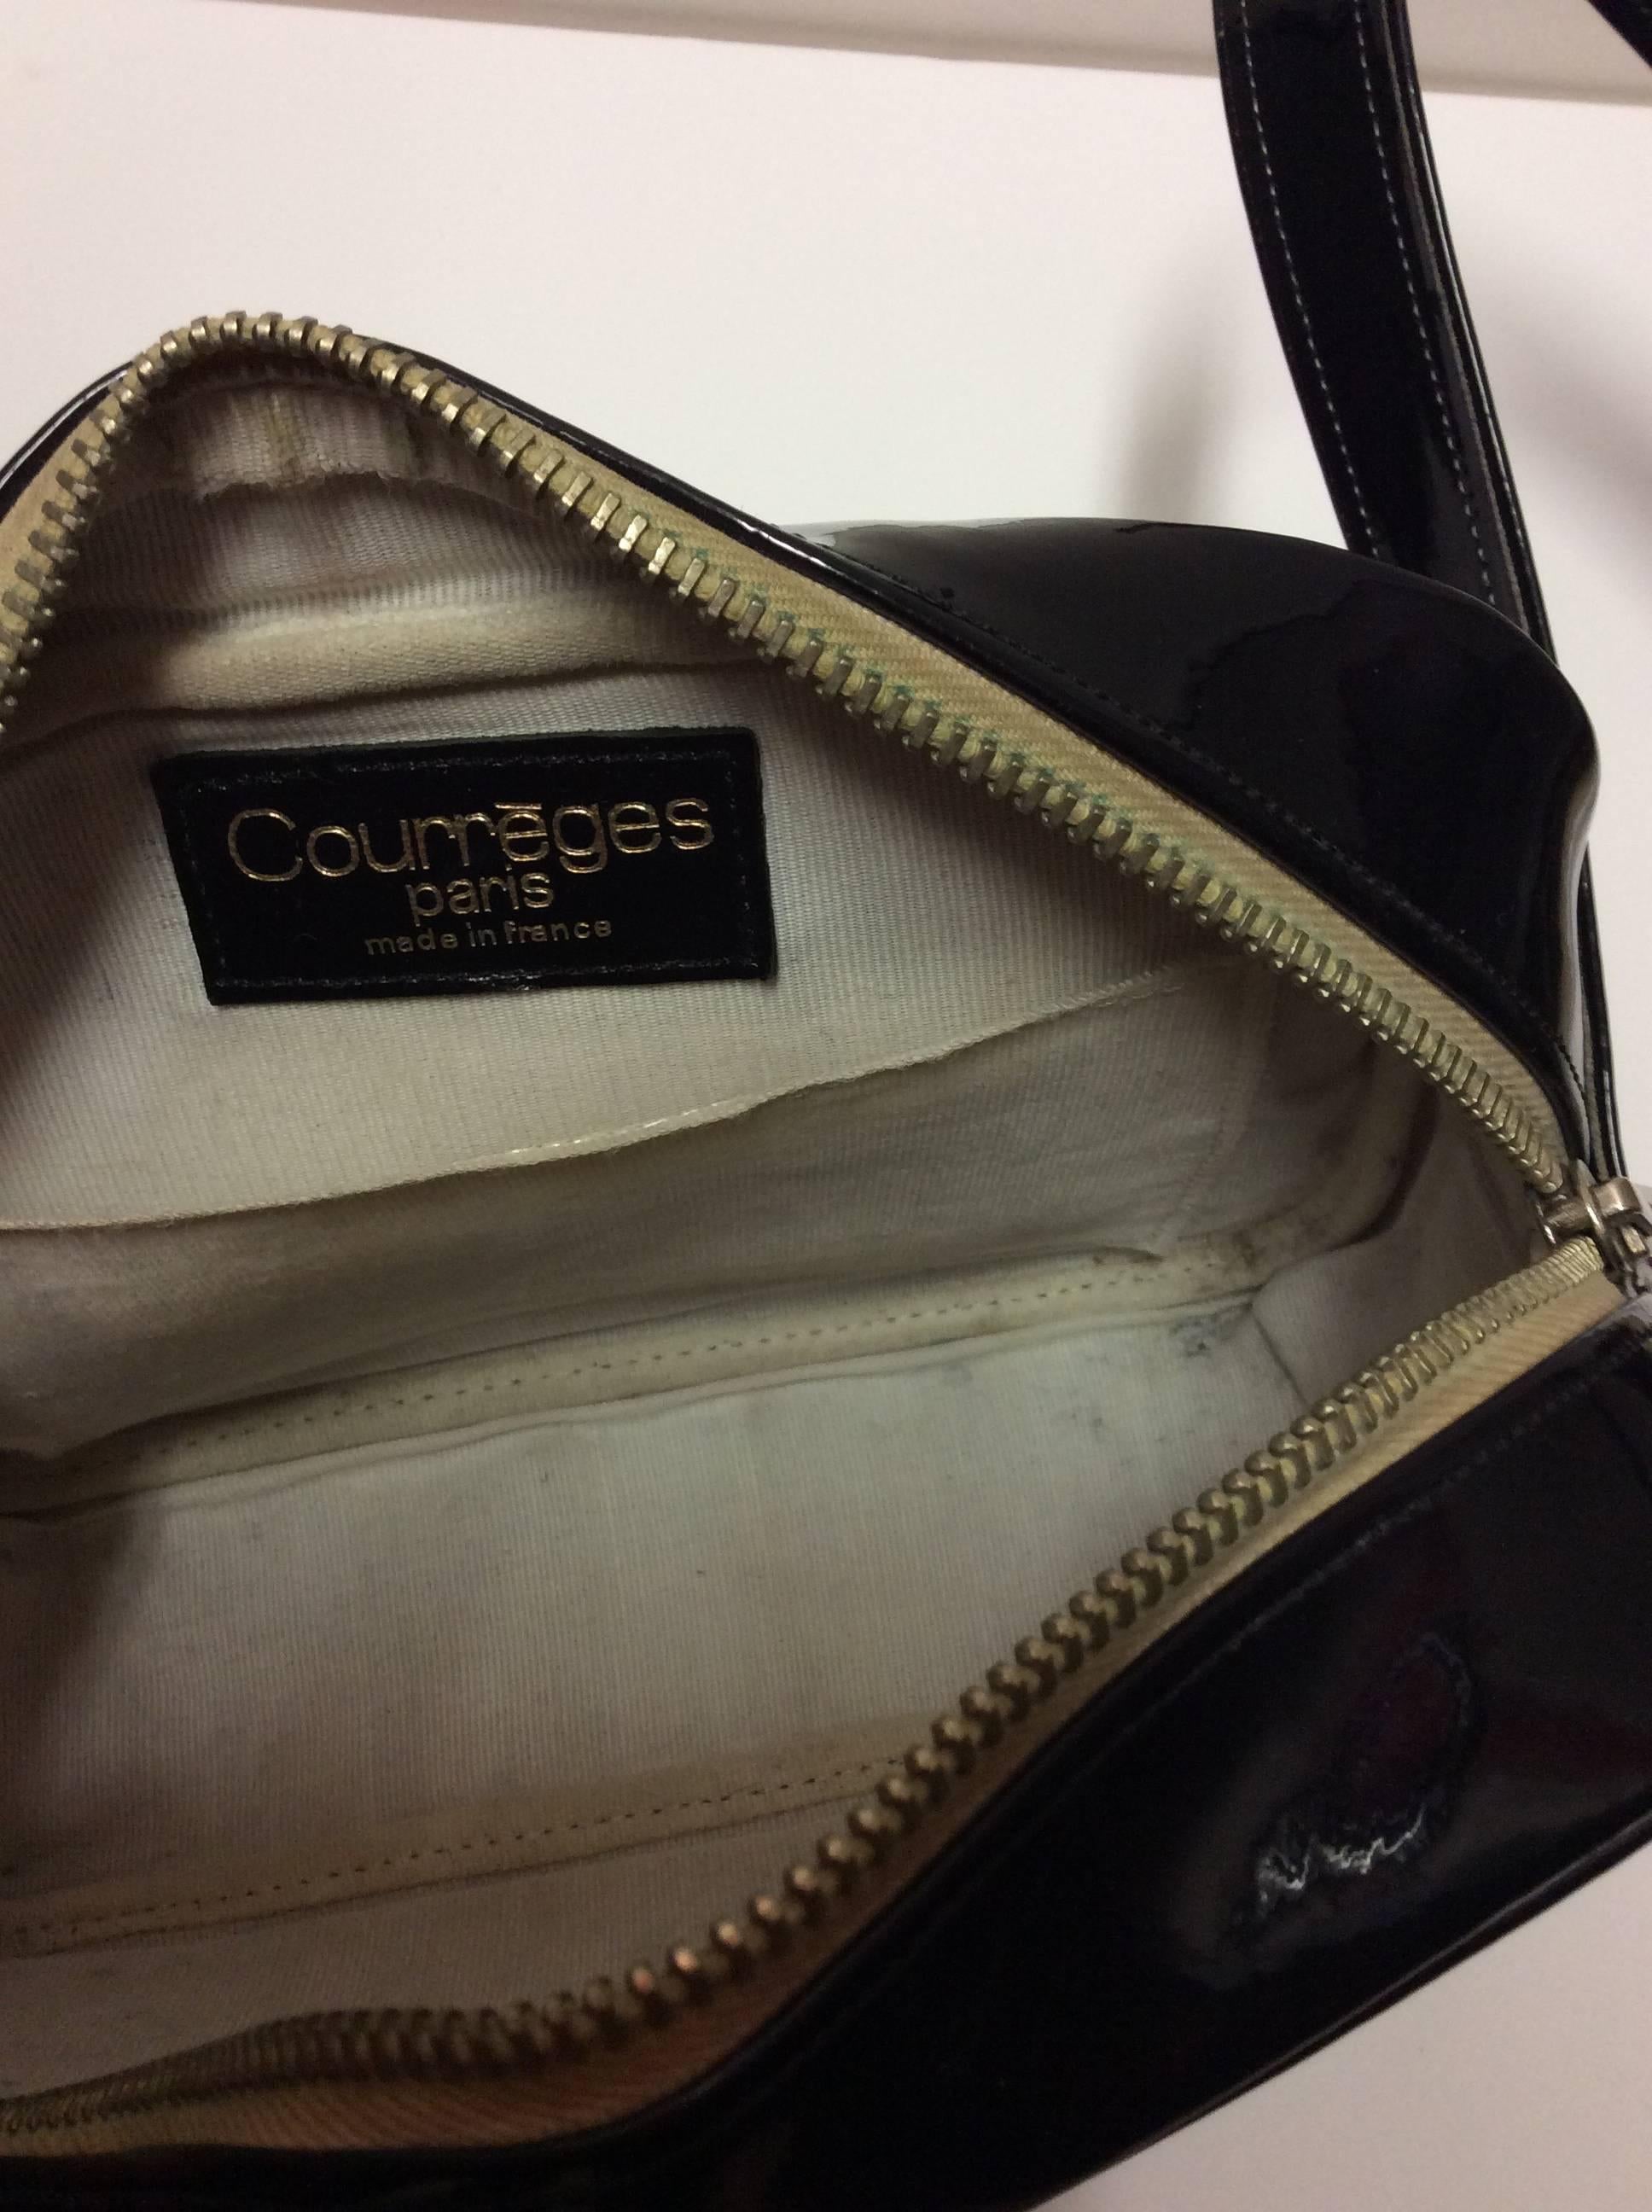 Courreges Black Patent Leather with White Leather Logo cut out Handbag 5